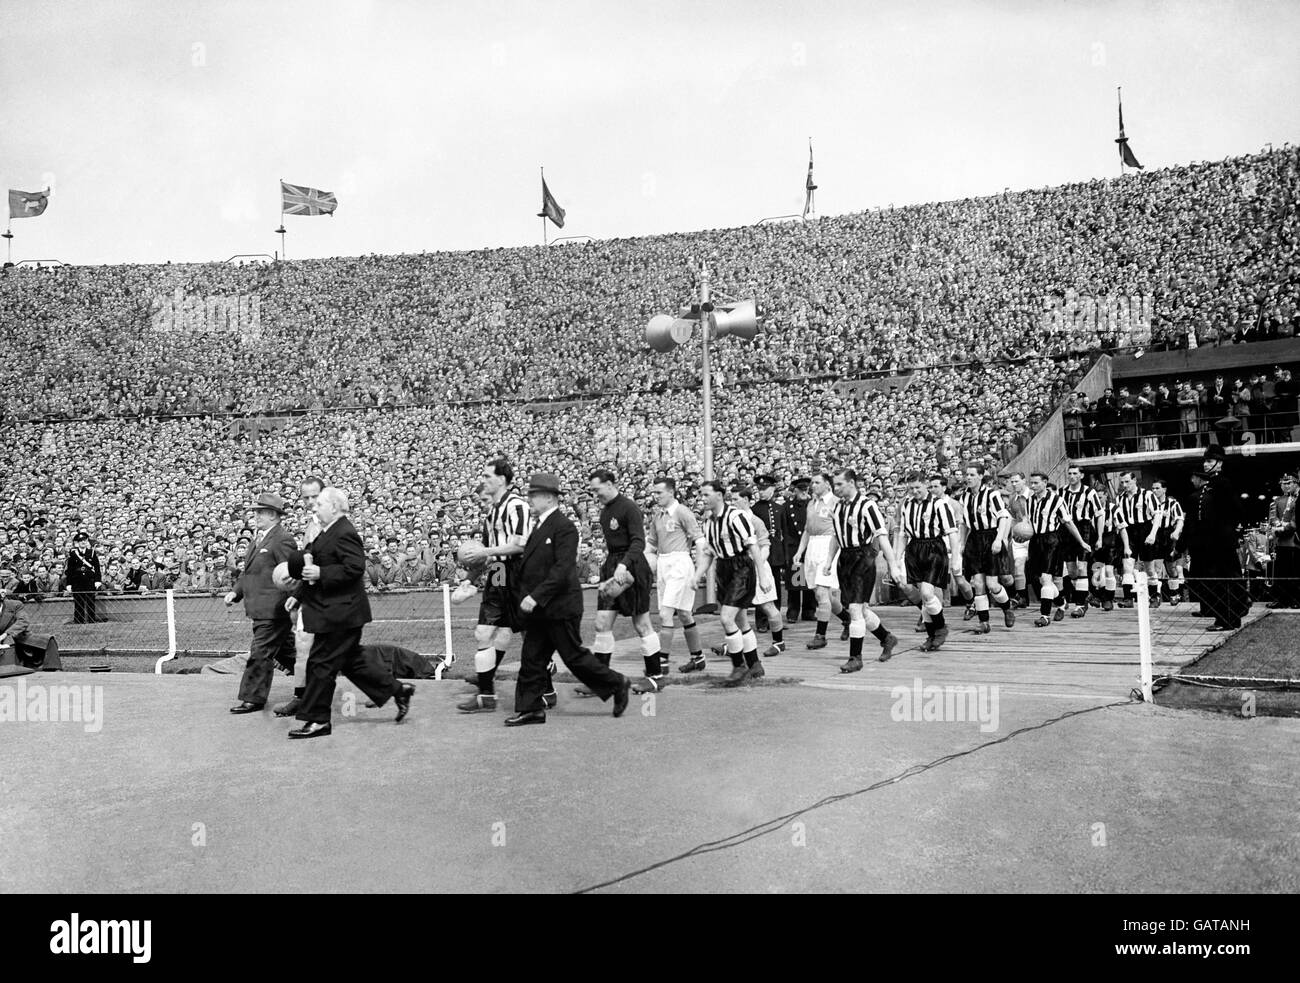 Newcastle United and Blackpool football teams taking to the field. Stock Photo